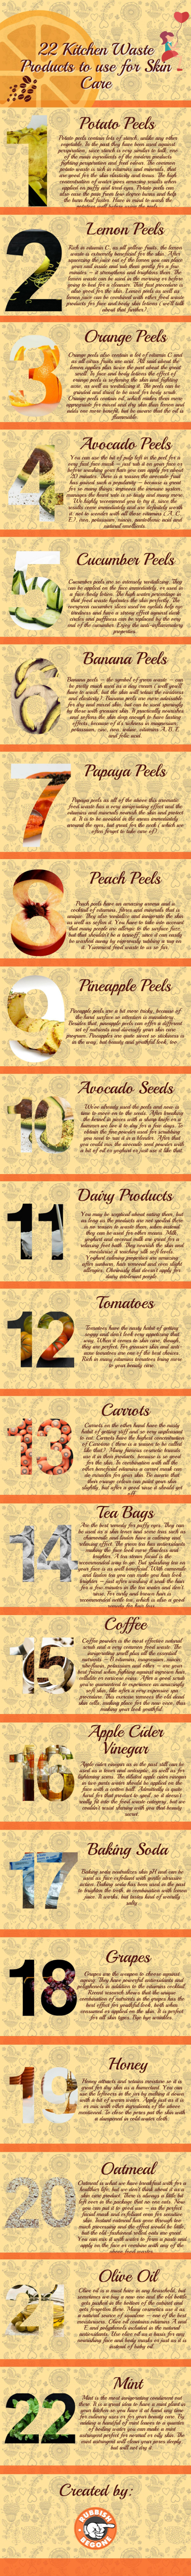 22 Food Wastes to use for Beauty Treatements Infographic